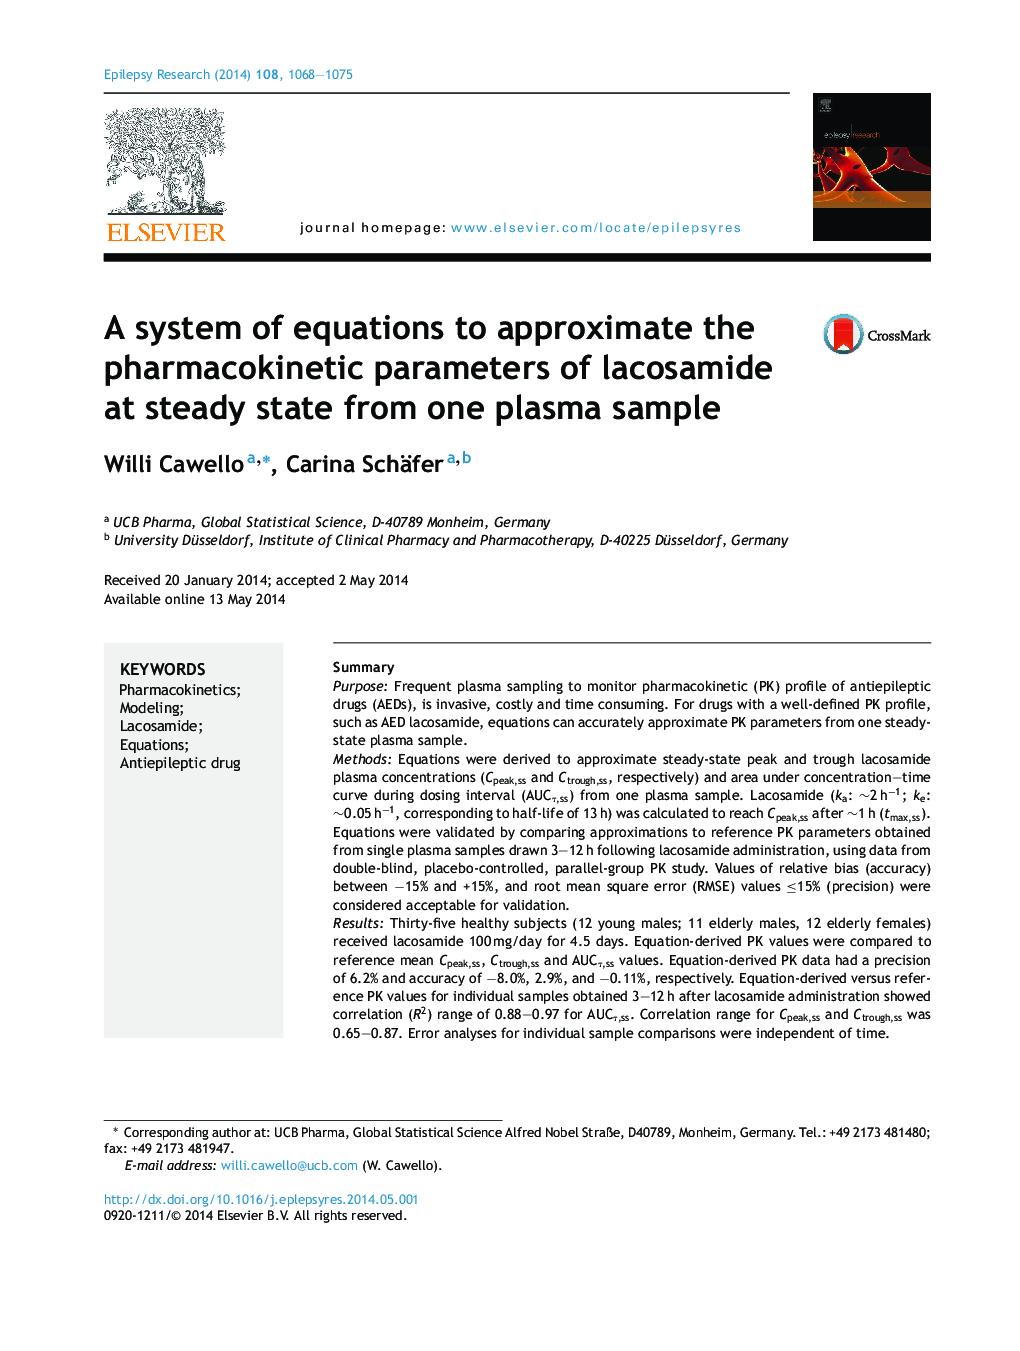 A system of equations to approximate the pharmacokinetic parameters of lacosamide at steady state from one plasma sample